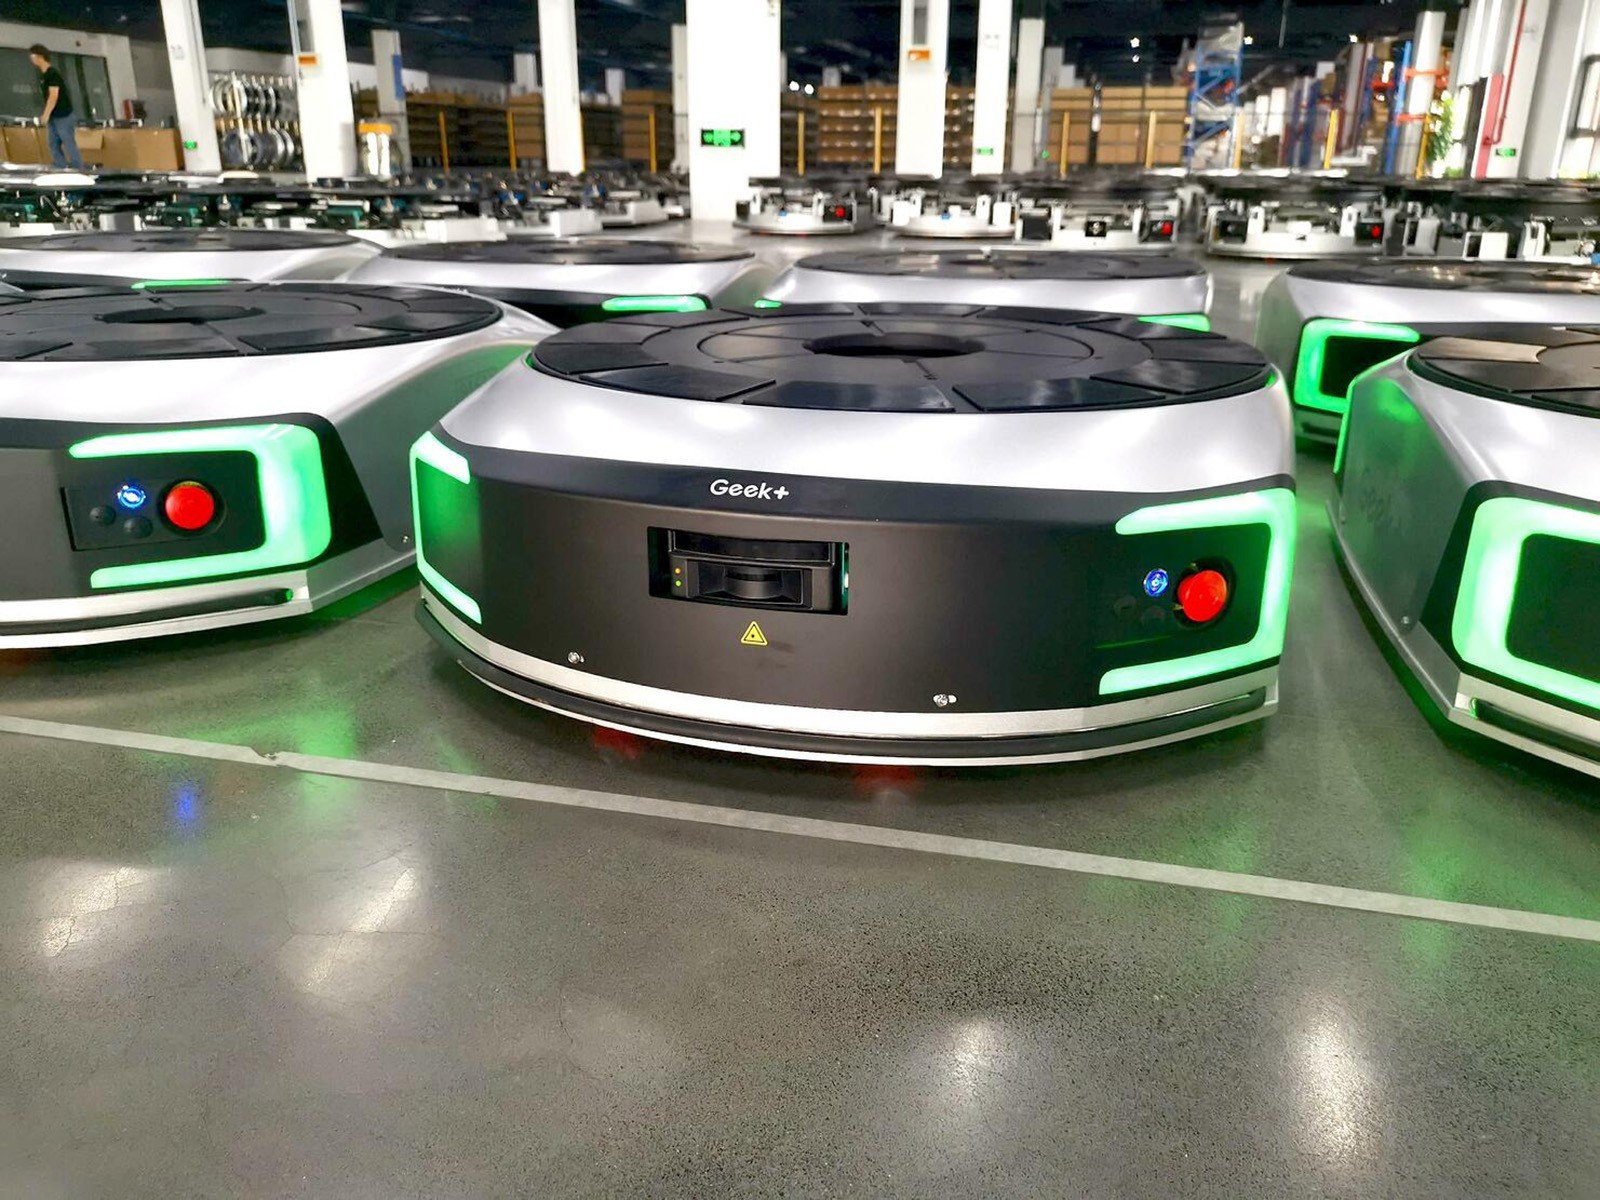 Logistics robots from Geek+ Technology are seen at the company’s factory in Nanjing, capital of the eastern coastal province of Jiangsu. These moving systems are deployed to carry shelves for inventory management in modern automated warehouses. Photo: Handout